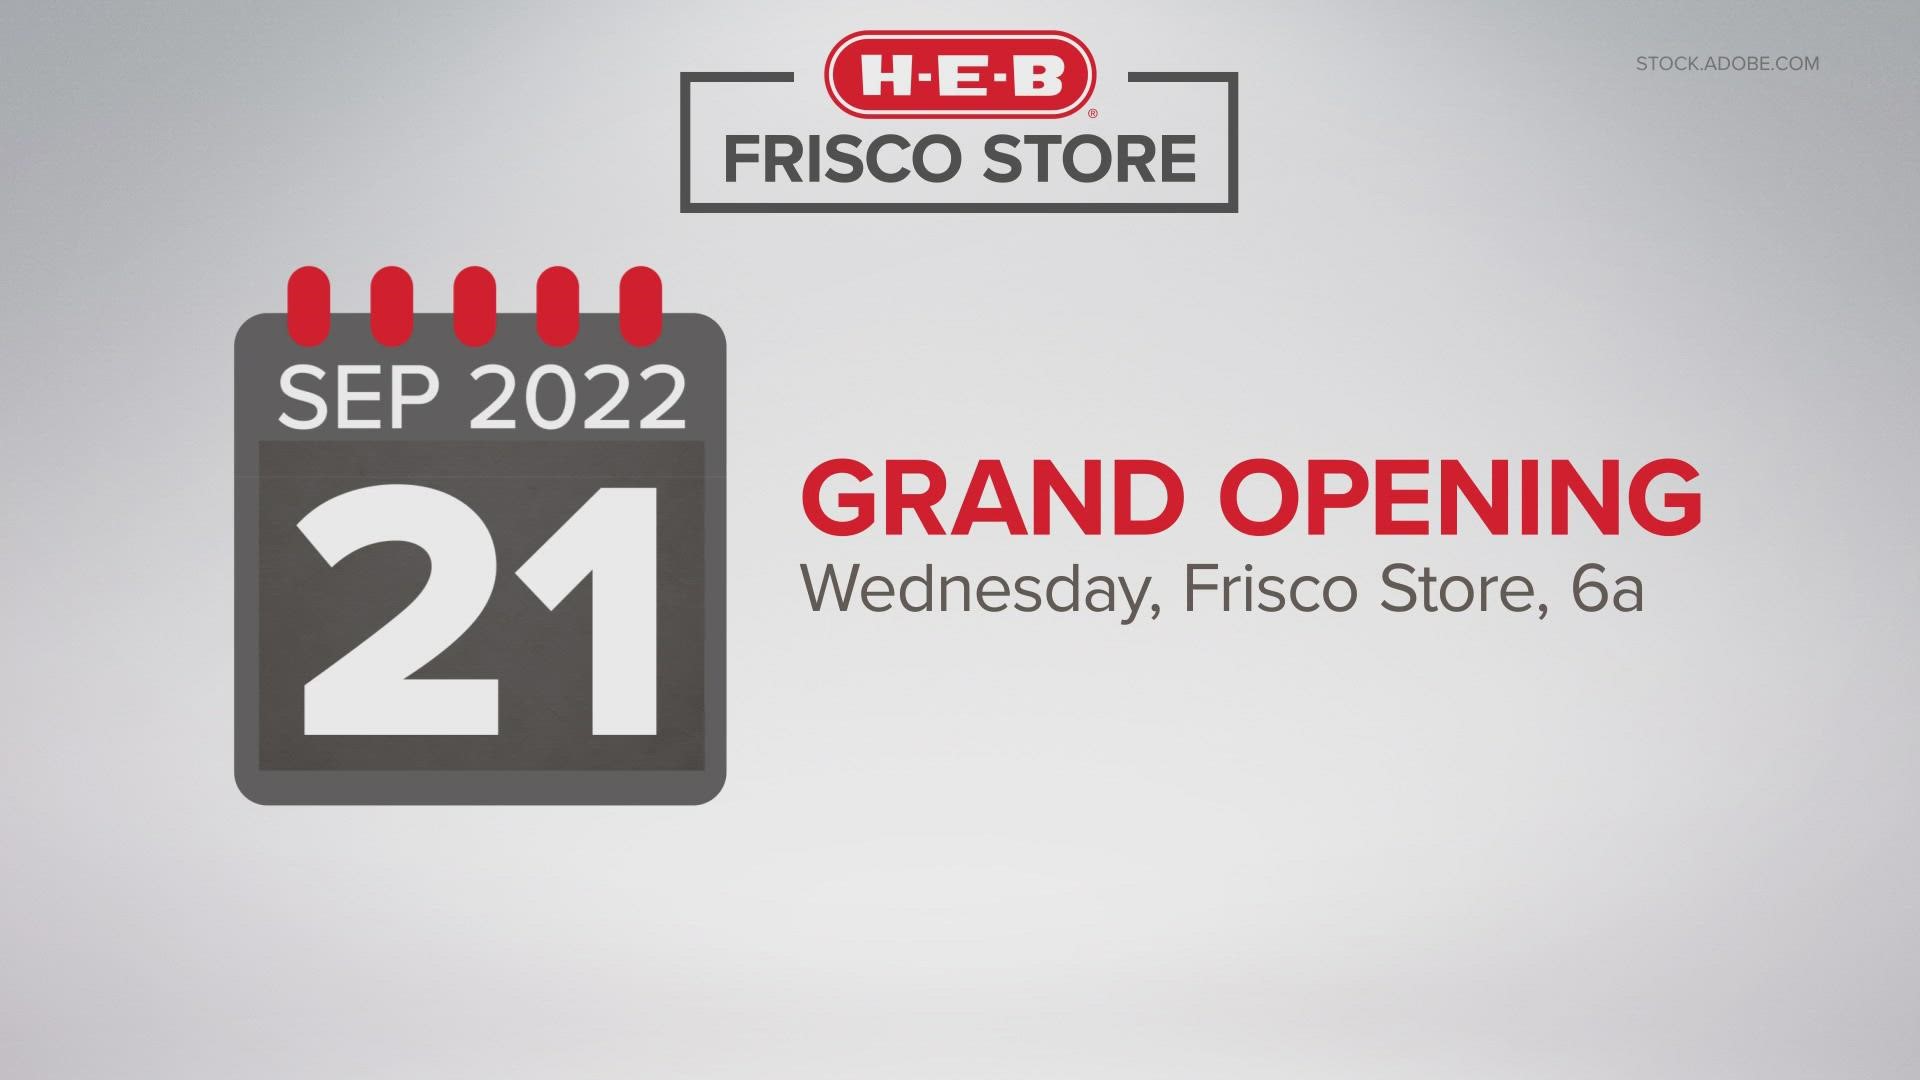 North Texas residents won't have to wait much longer for the newest H-E-B store.